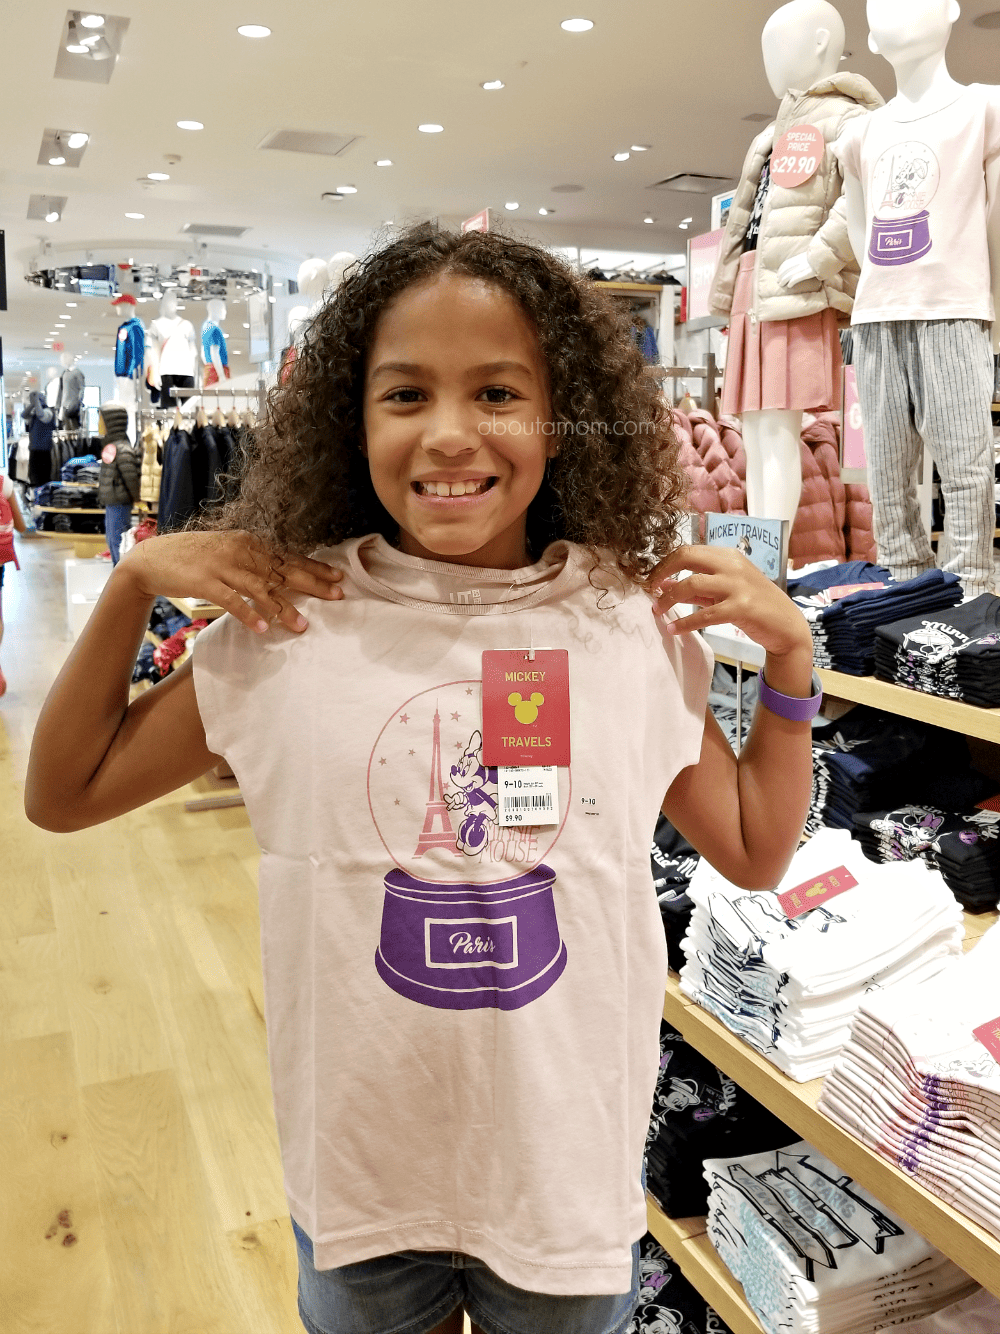 Insider's Guide to back to school shopping at Disney Springs. At Disney Springs you will find all of your back to school staples, along with a large selection of kids' clothing and accessories.